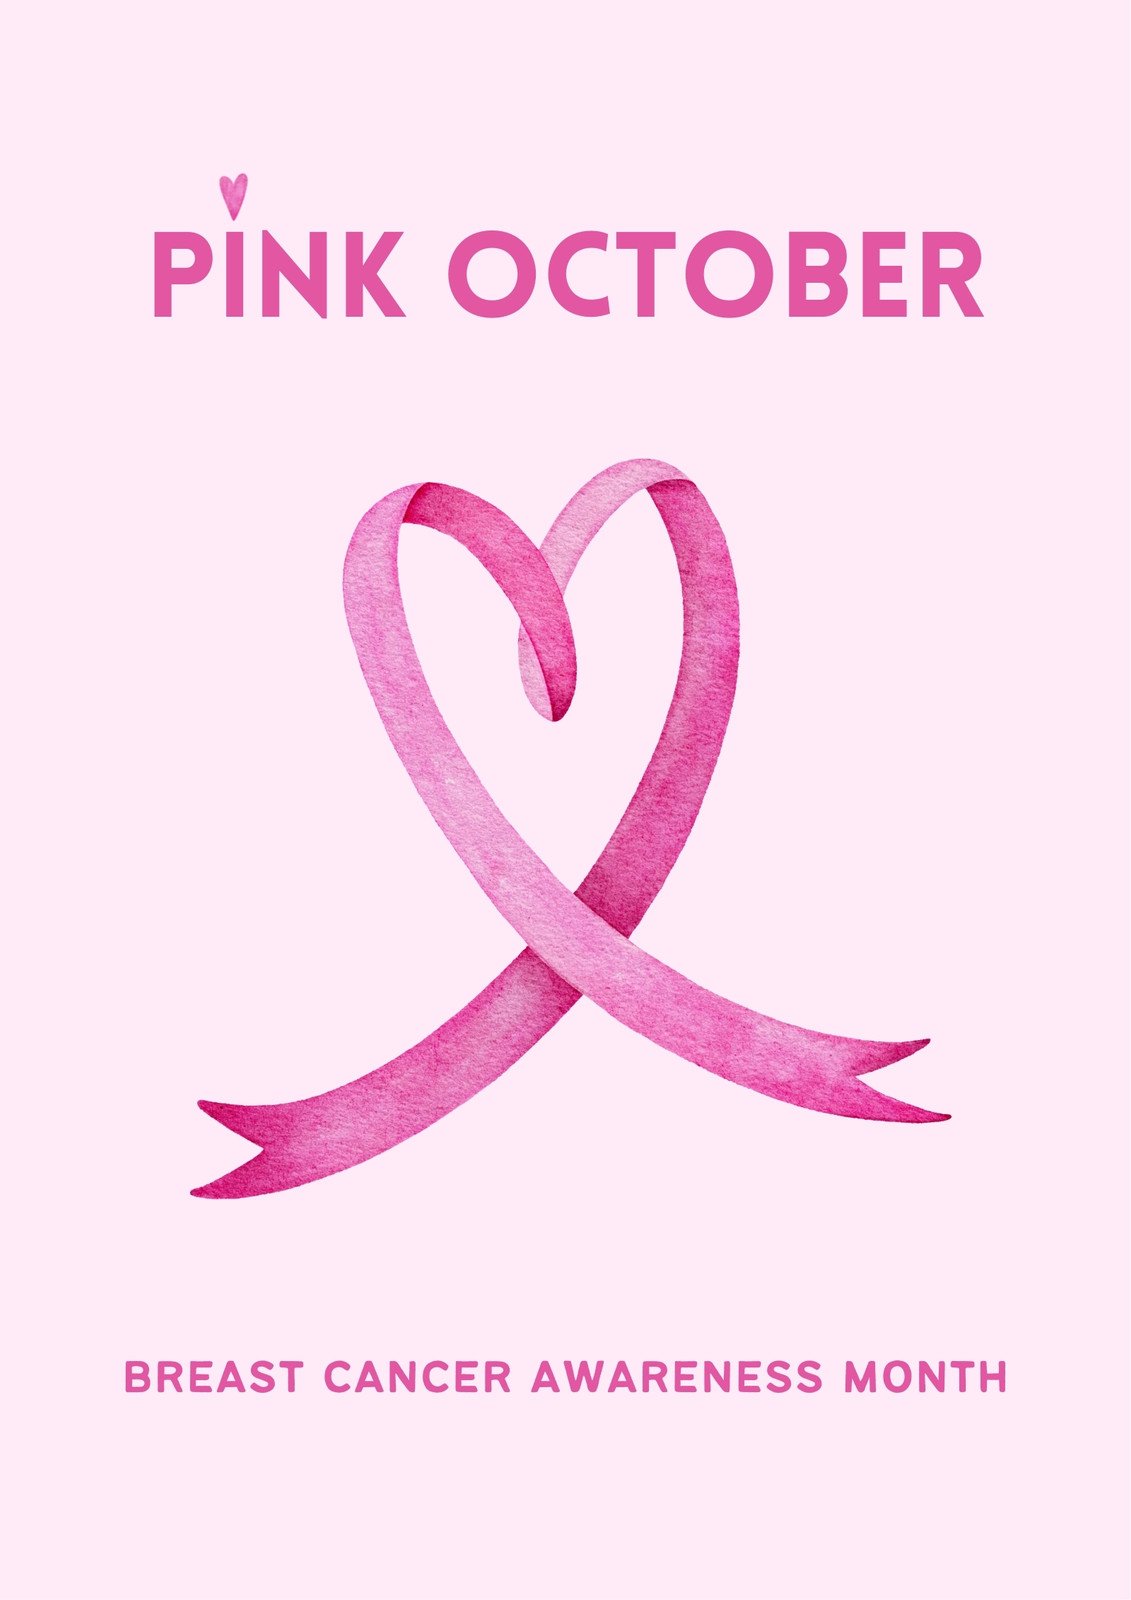 Breast Cancer awareness month बरसट ह नह अडरआरम क गठ भ  बरसट कसर क लकषण नशन पर नई उमर क महलए  breast cancer  awareness month new trend in india shows 30